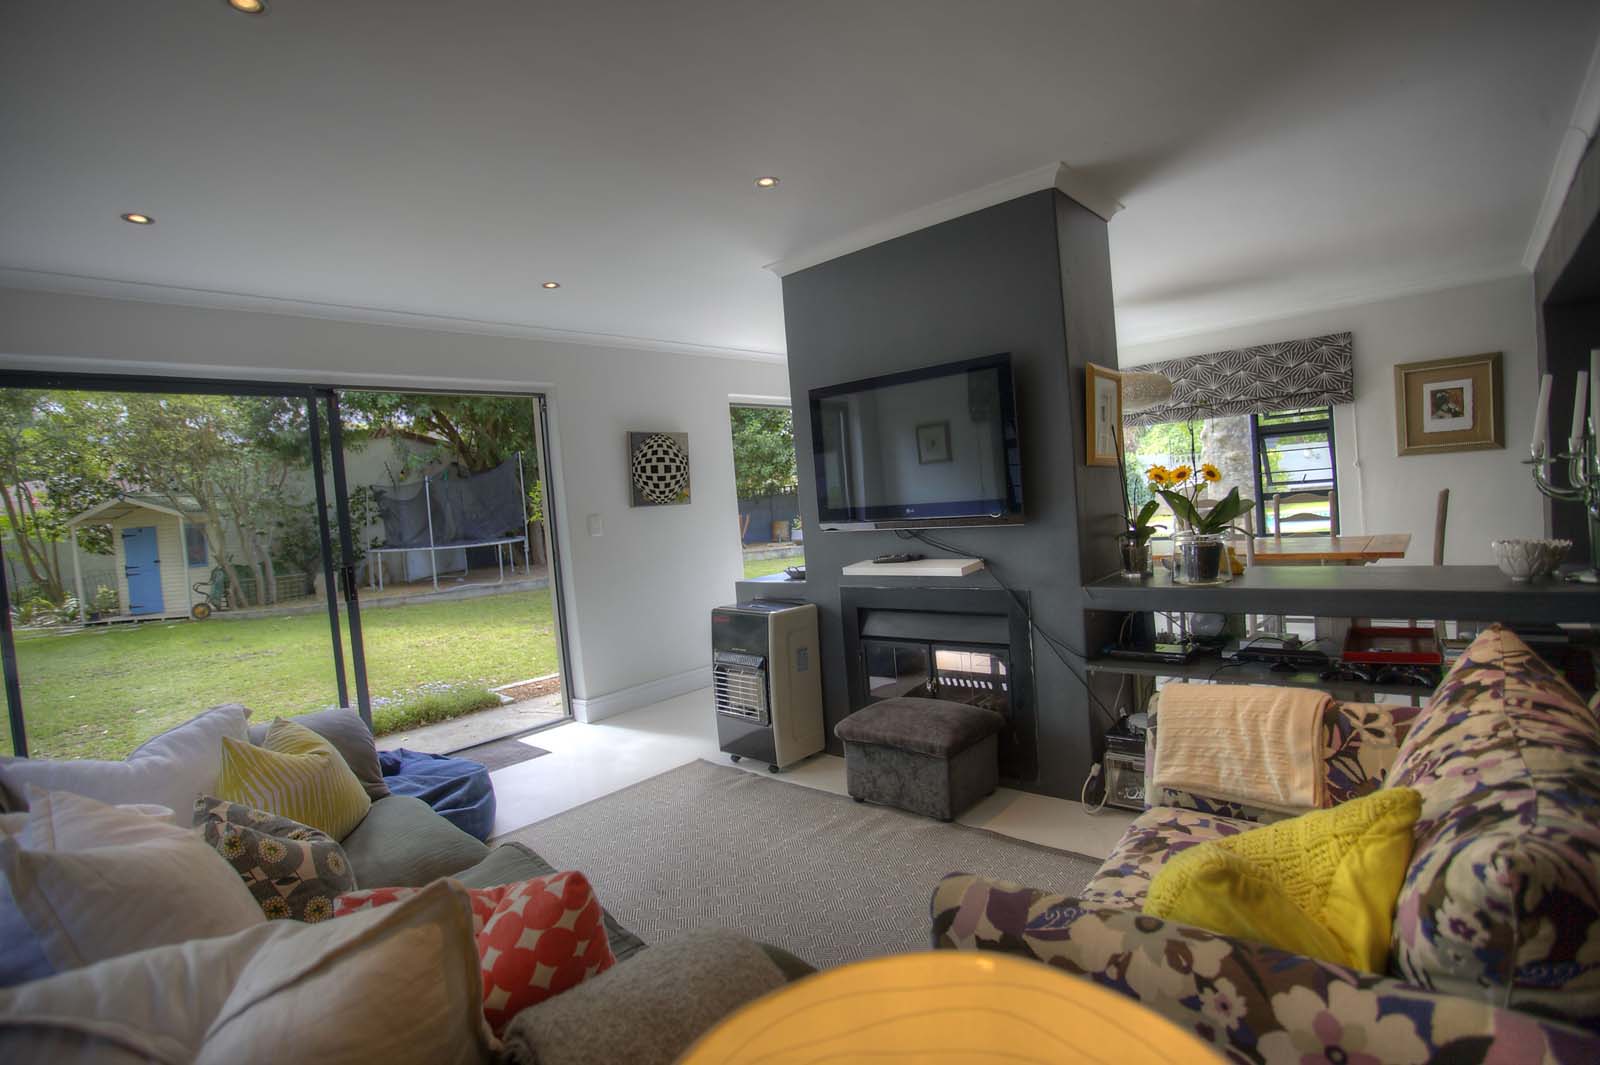 Photo 23 of Villa Robertson accommodation in Constantia, Cape Town with 4 bedrooms and 3 bathrooms